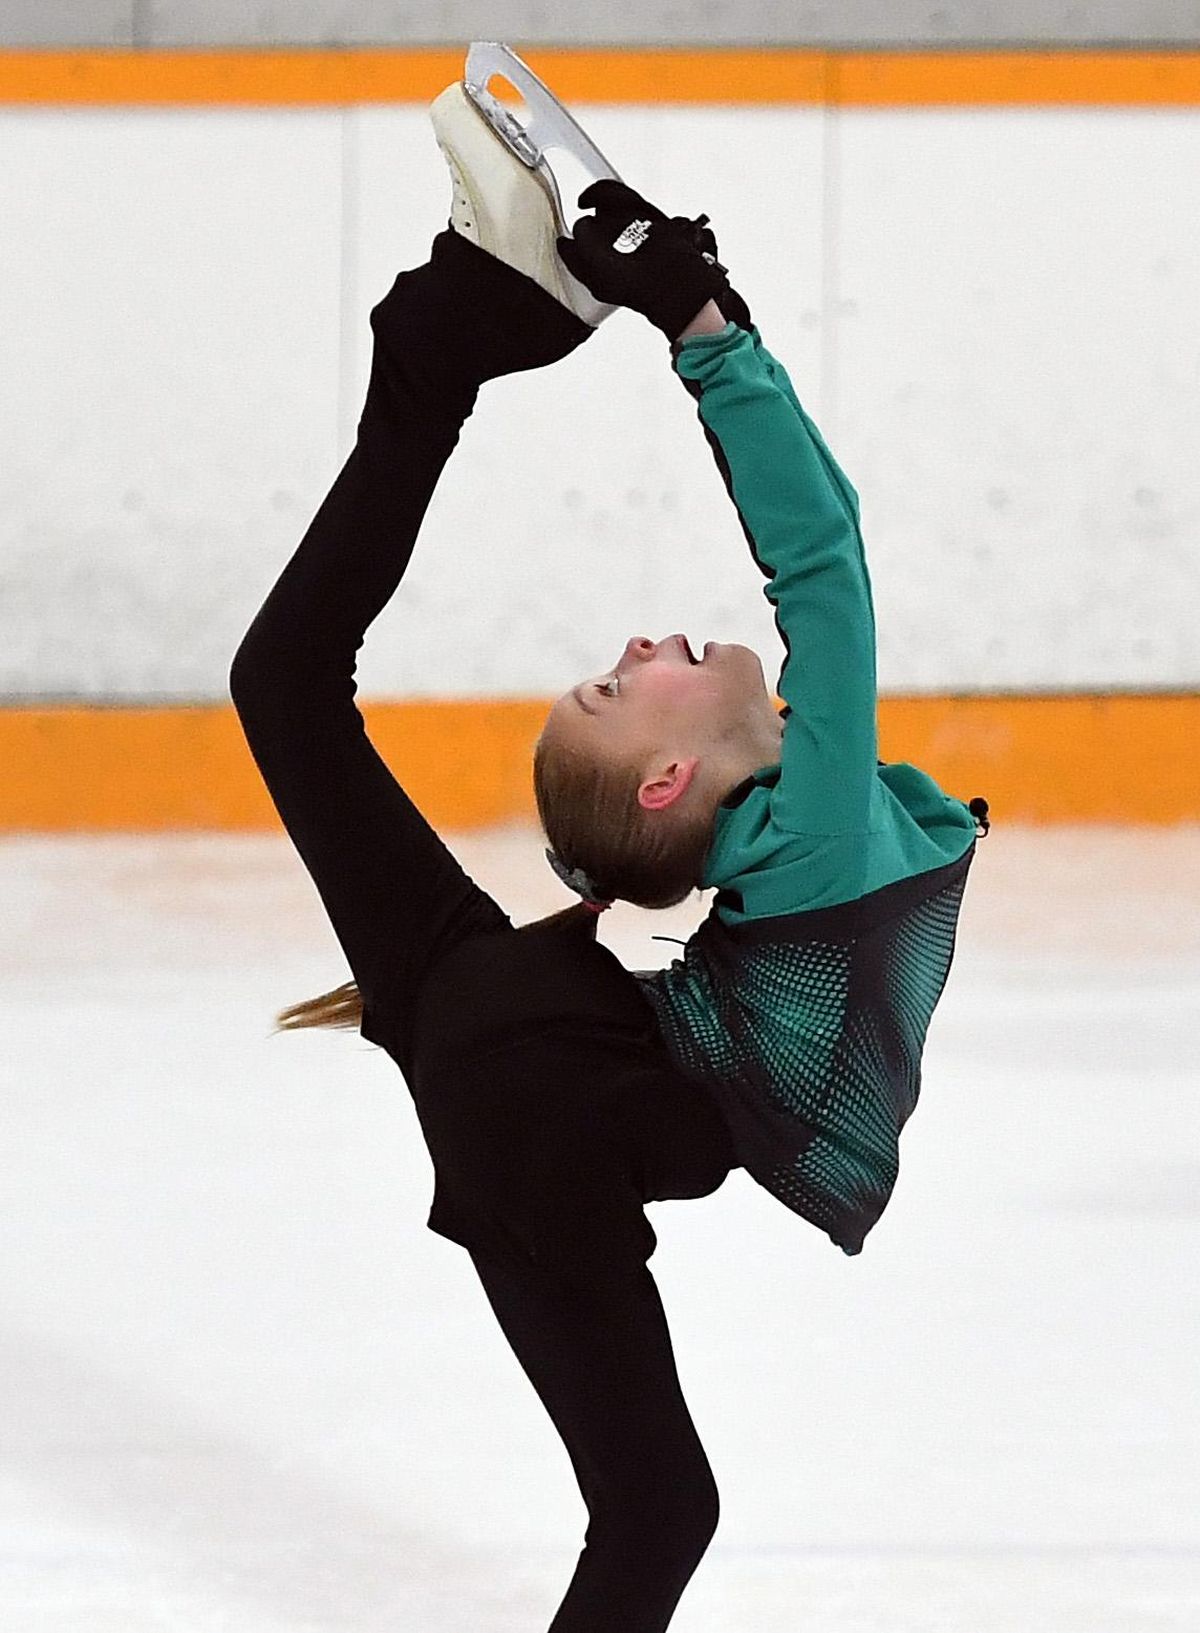 Emma Dickau, the daughter of former Gonzaga great Dan Dickau, has put in the work to become an accomplished skater at the age of 10. (Colin Mulvany / The Spokesman-Review)